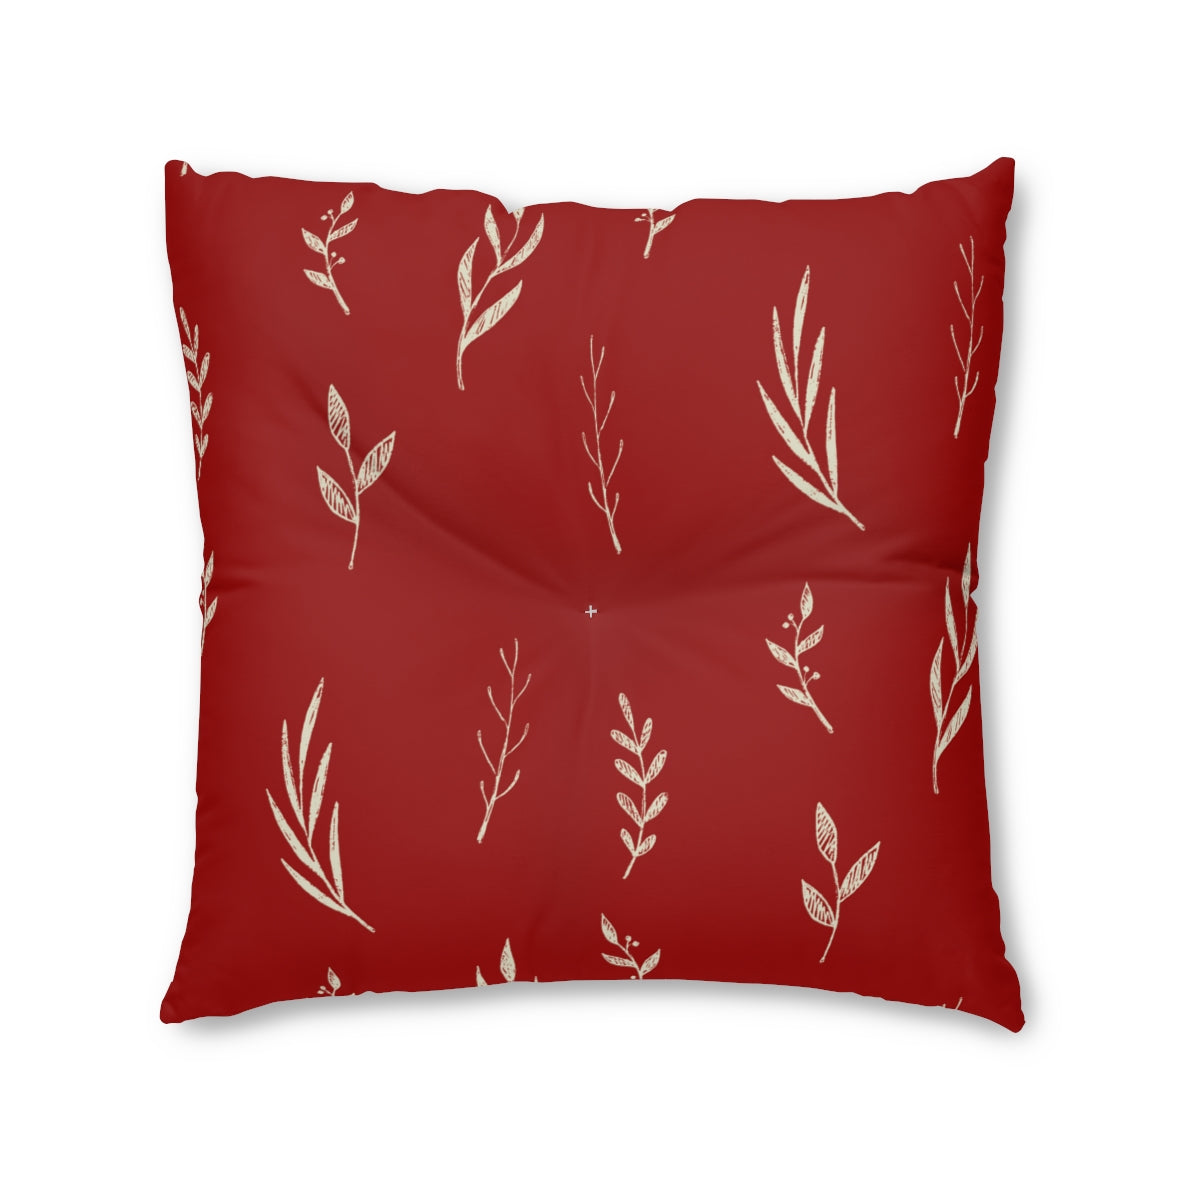 Lifestyle Details - Red Square Tufted Holiday Floor Pillow - White Garland - 26x26 - Front View